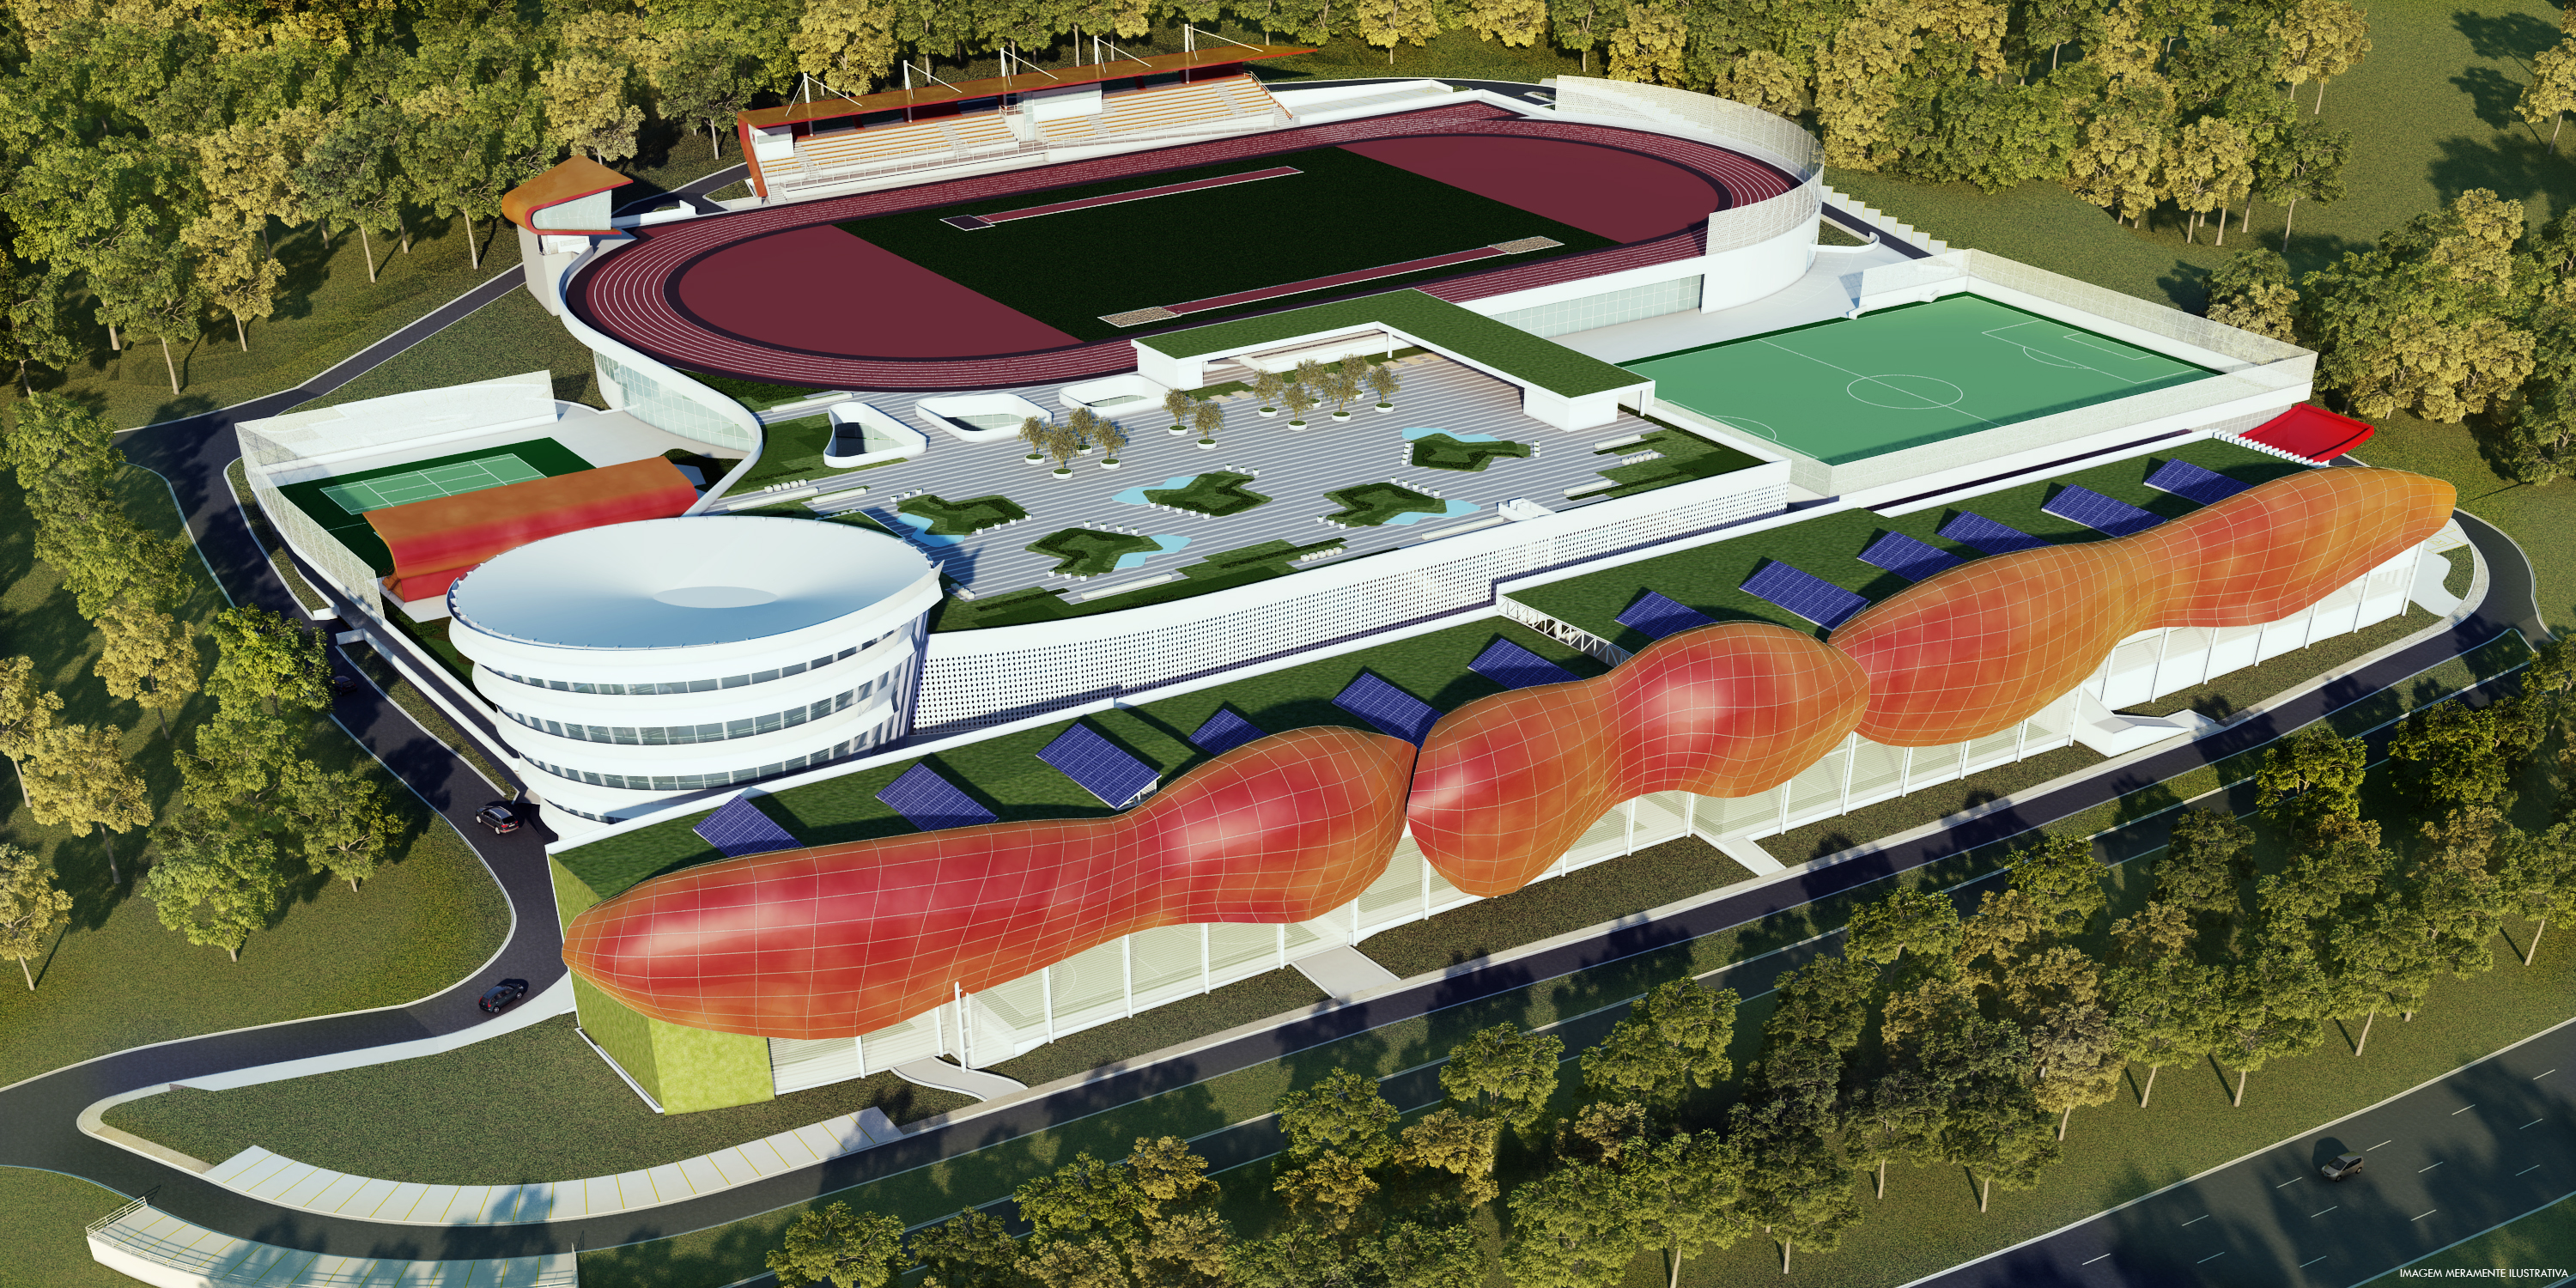 No. 43: Brazil aims high for 2016 with new training centre